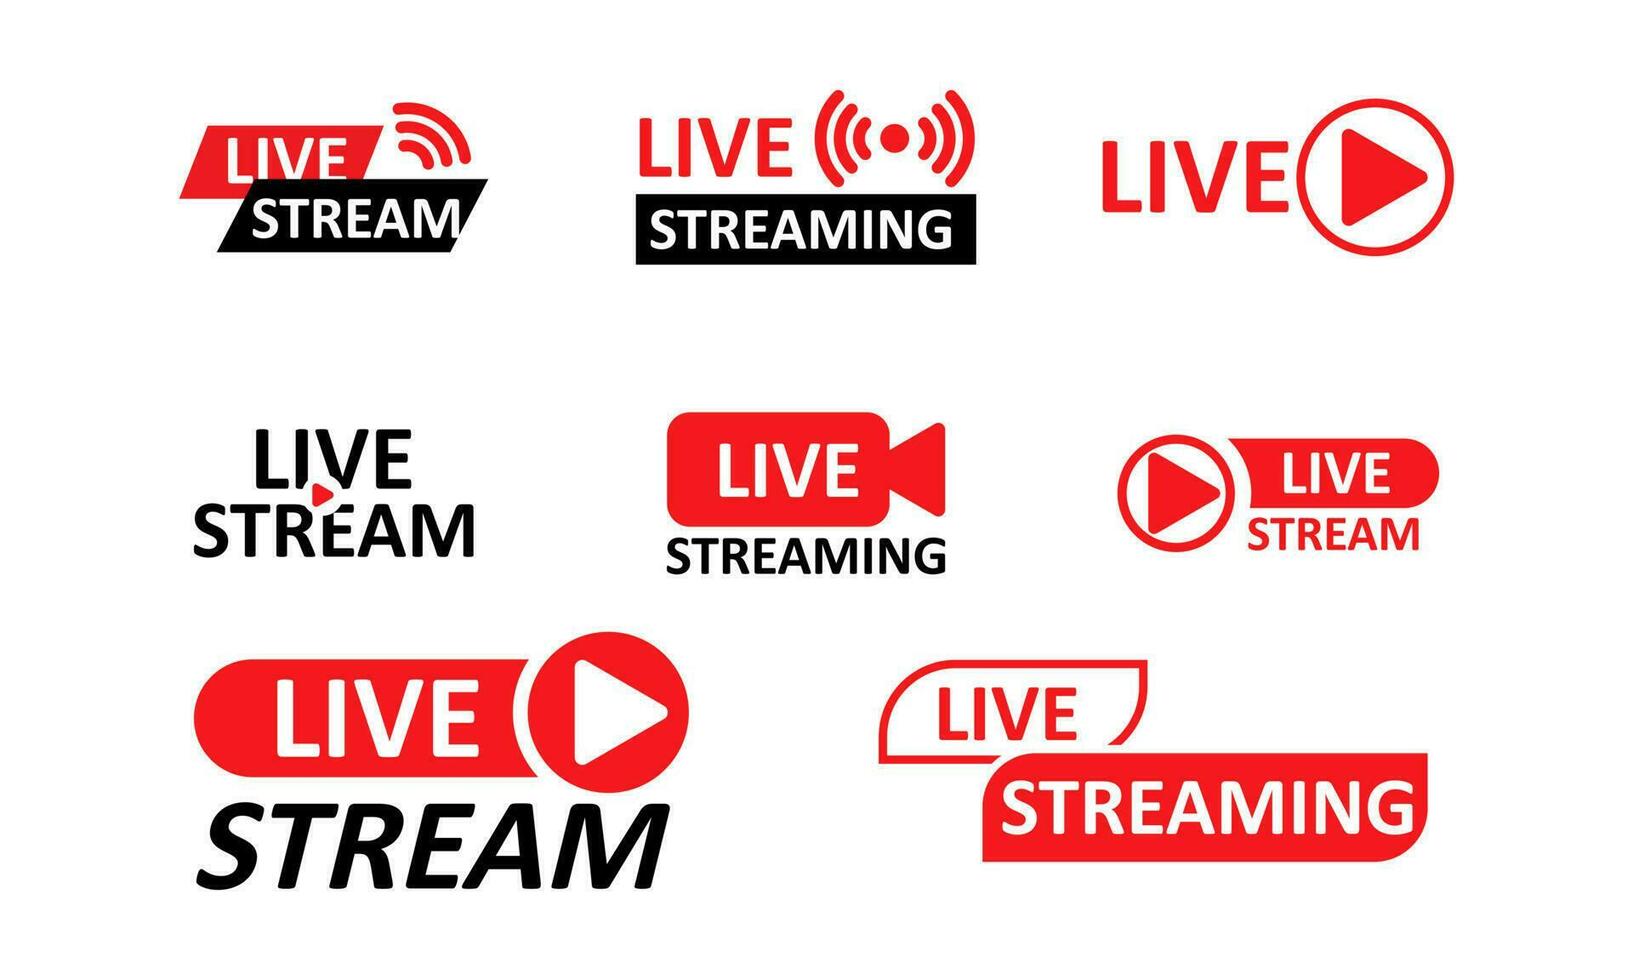 Live streaming set red icons. Play button icon vector illustration.